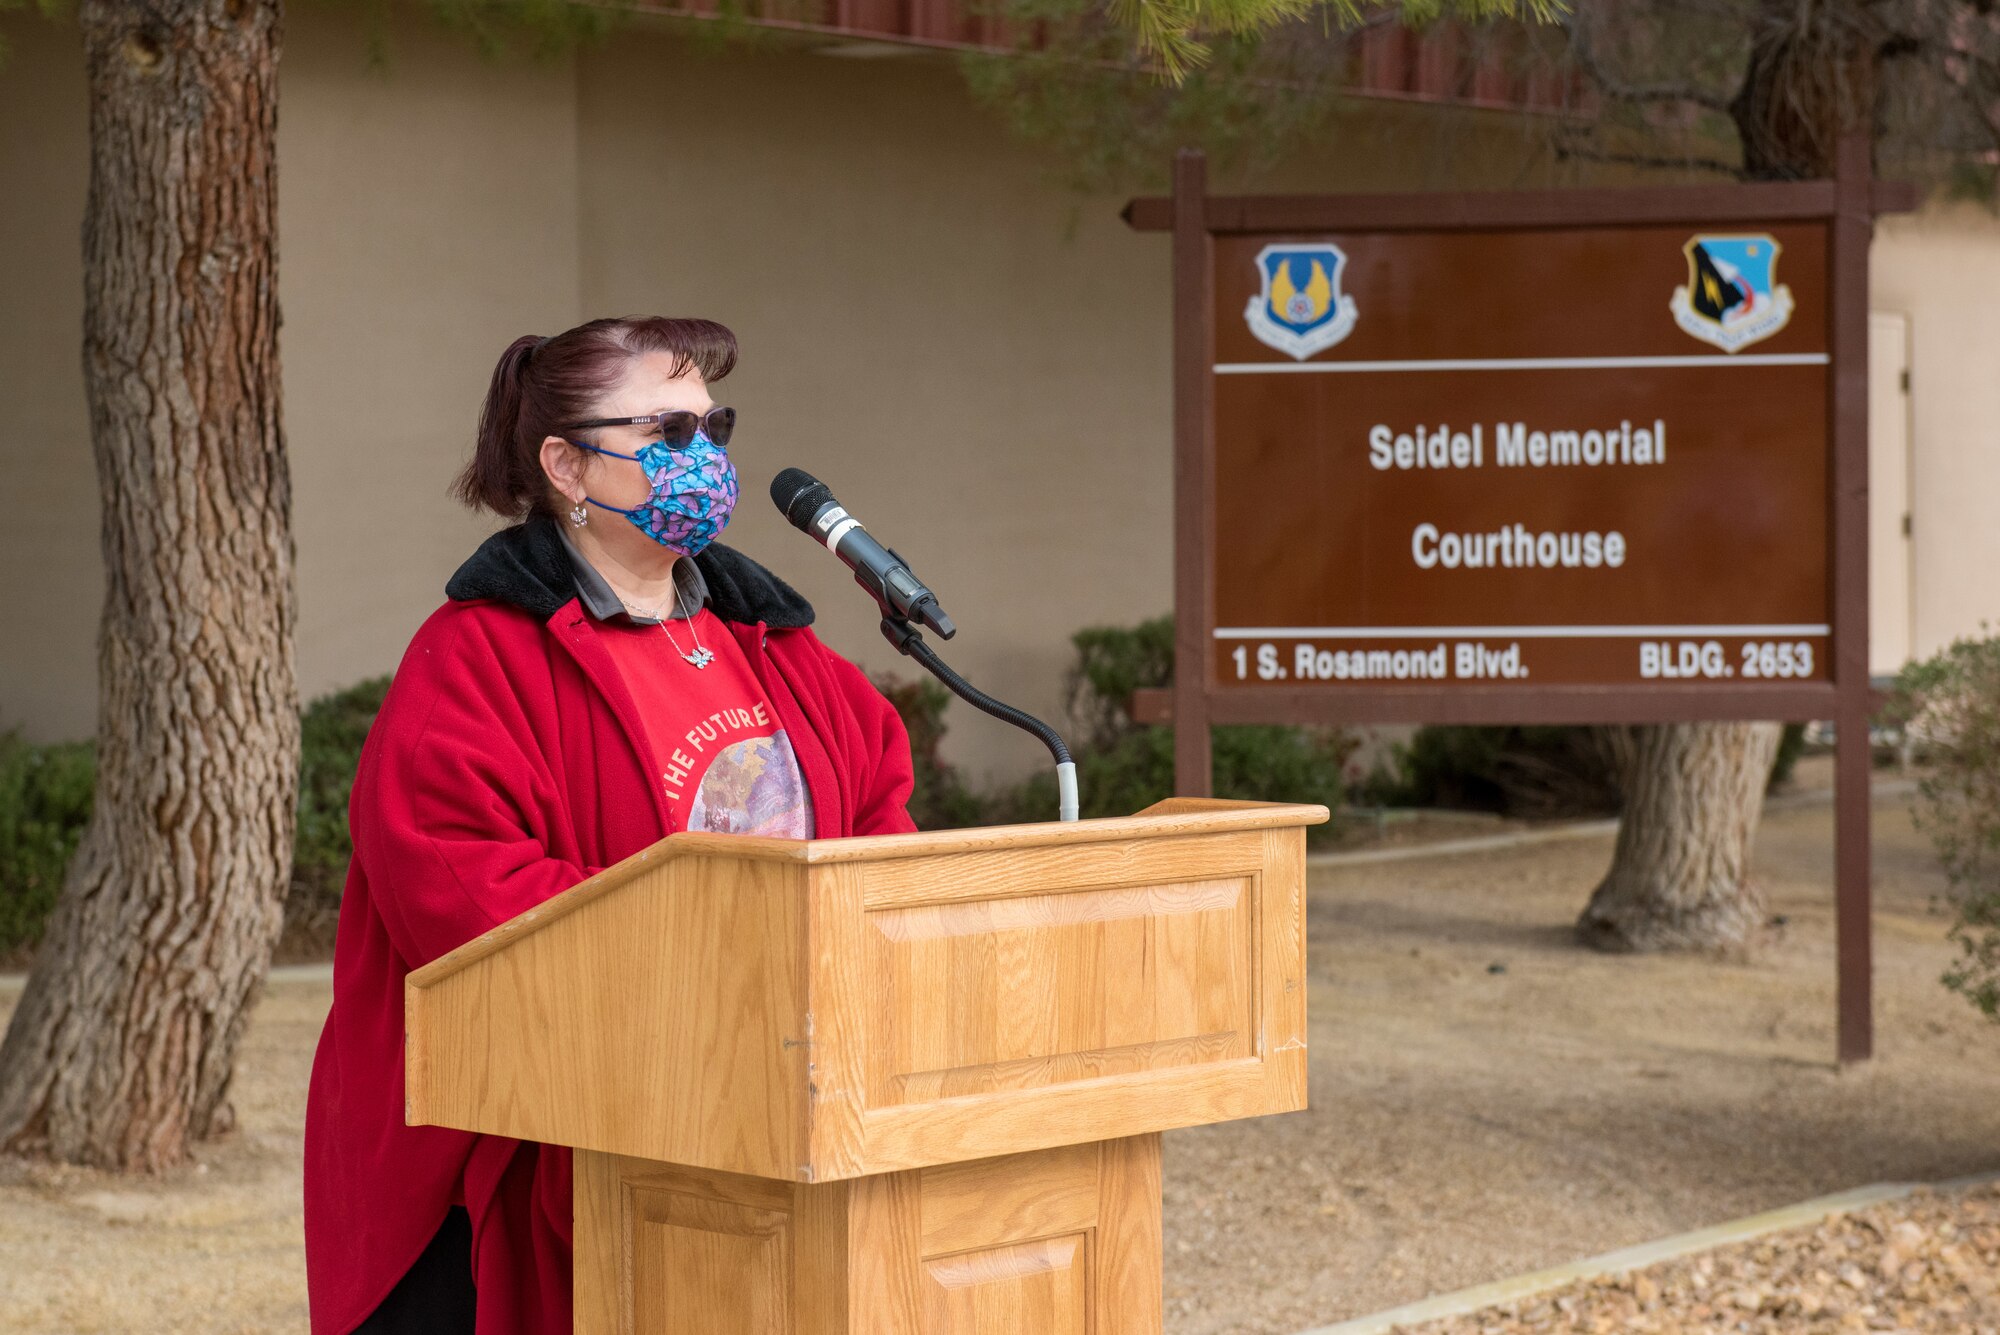 Courtesy Photo | Nadine Seidel, wife of the late Warren Seidel, gives remarks at the renaming ceremony of the “Seidel Memorial Courthouse” at Edwards Air Force Base, California, March 18. The courthouse is named after her husband, Warren Seidel, who passed away last year following a short battle with cancer, he had served at Edwards for almost 25 years. (Air Force photo by Richard Gonzales